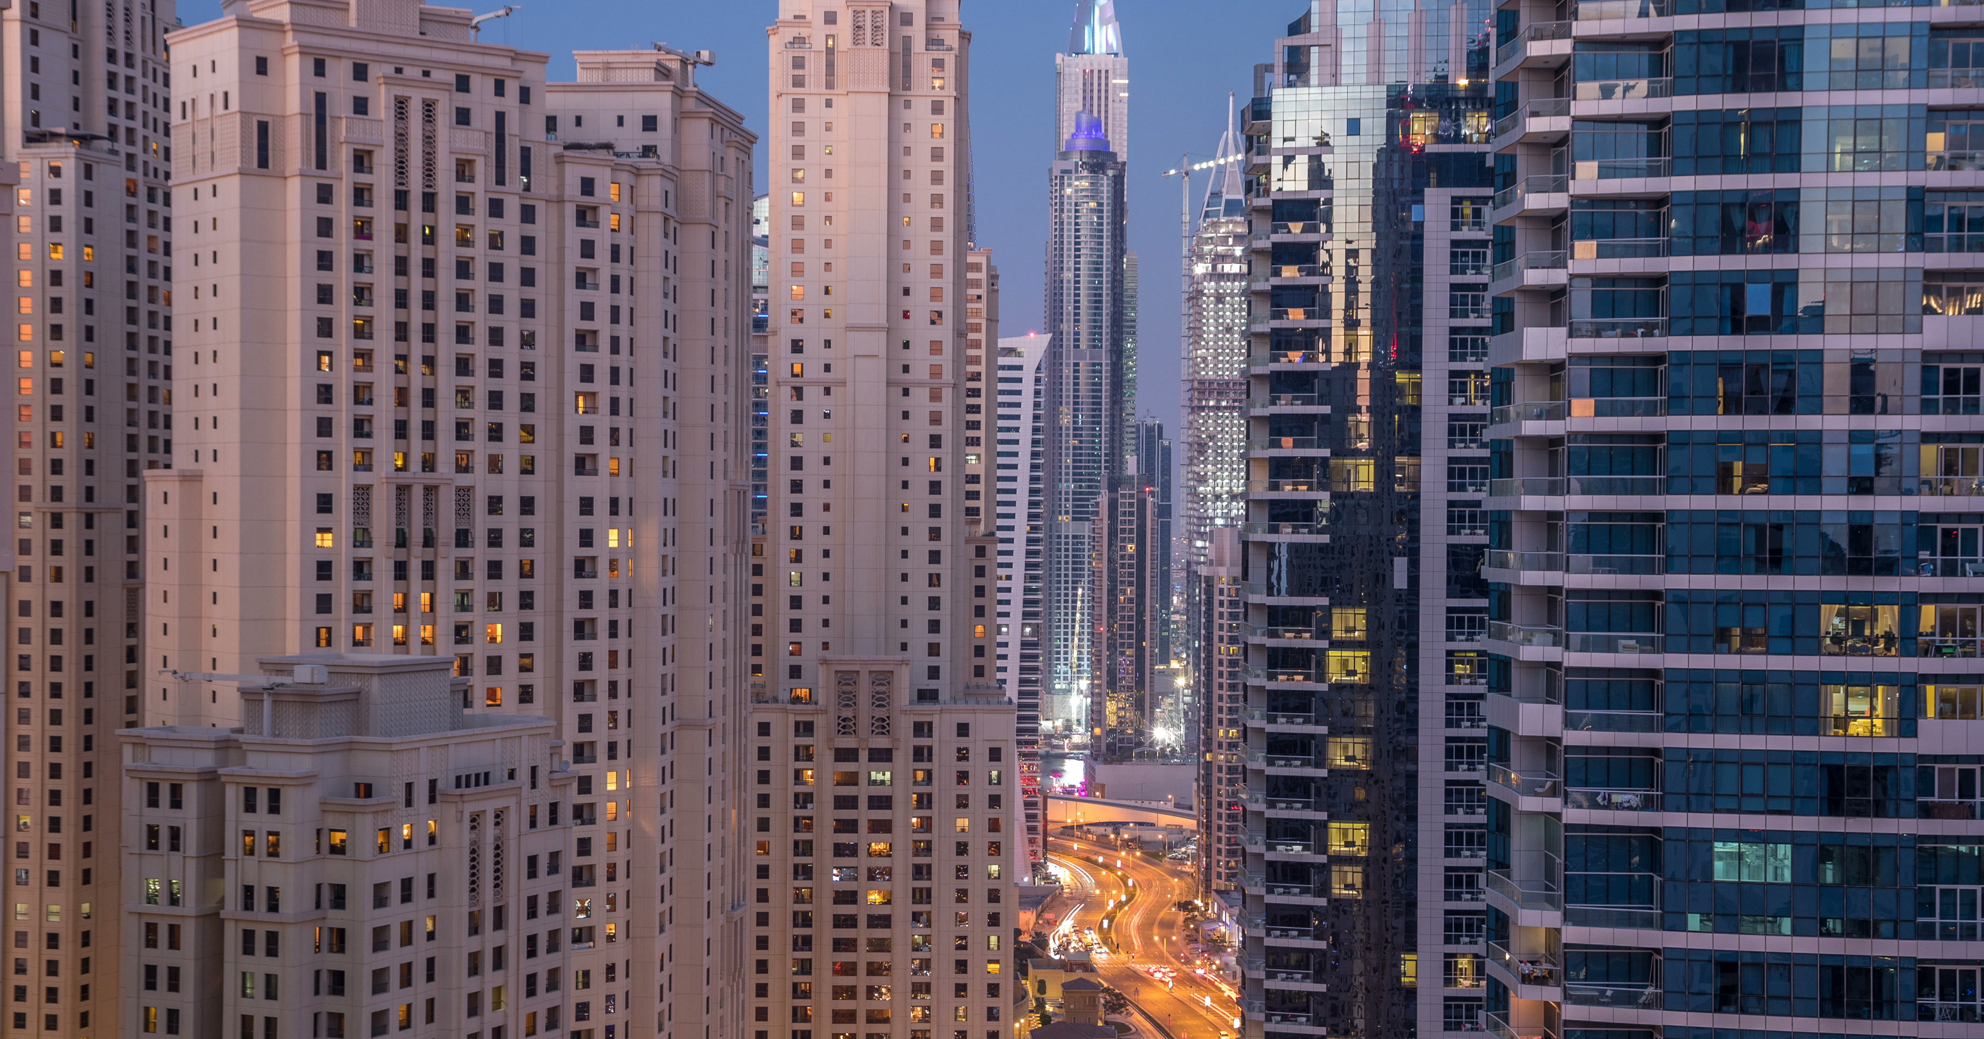 Skyscrapers and architecture of Dubai. How to rent in Dubai